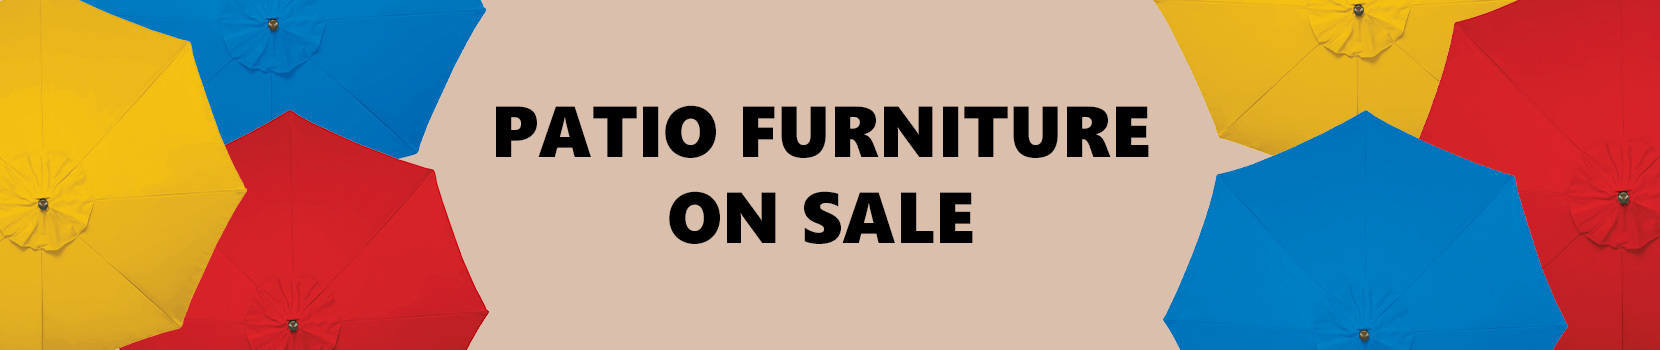 Patio-Furniture-On-Sale-Banner_1660x350